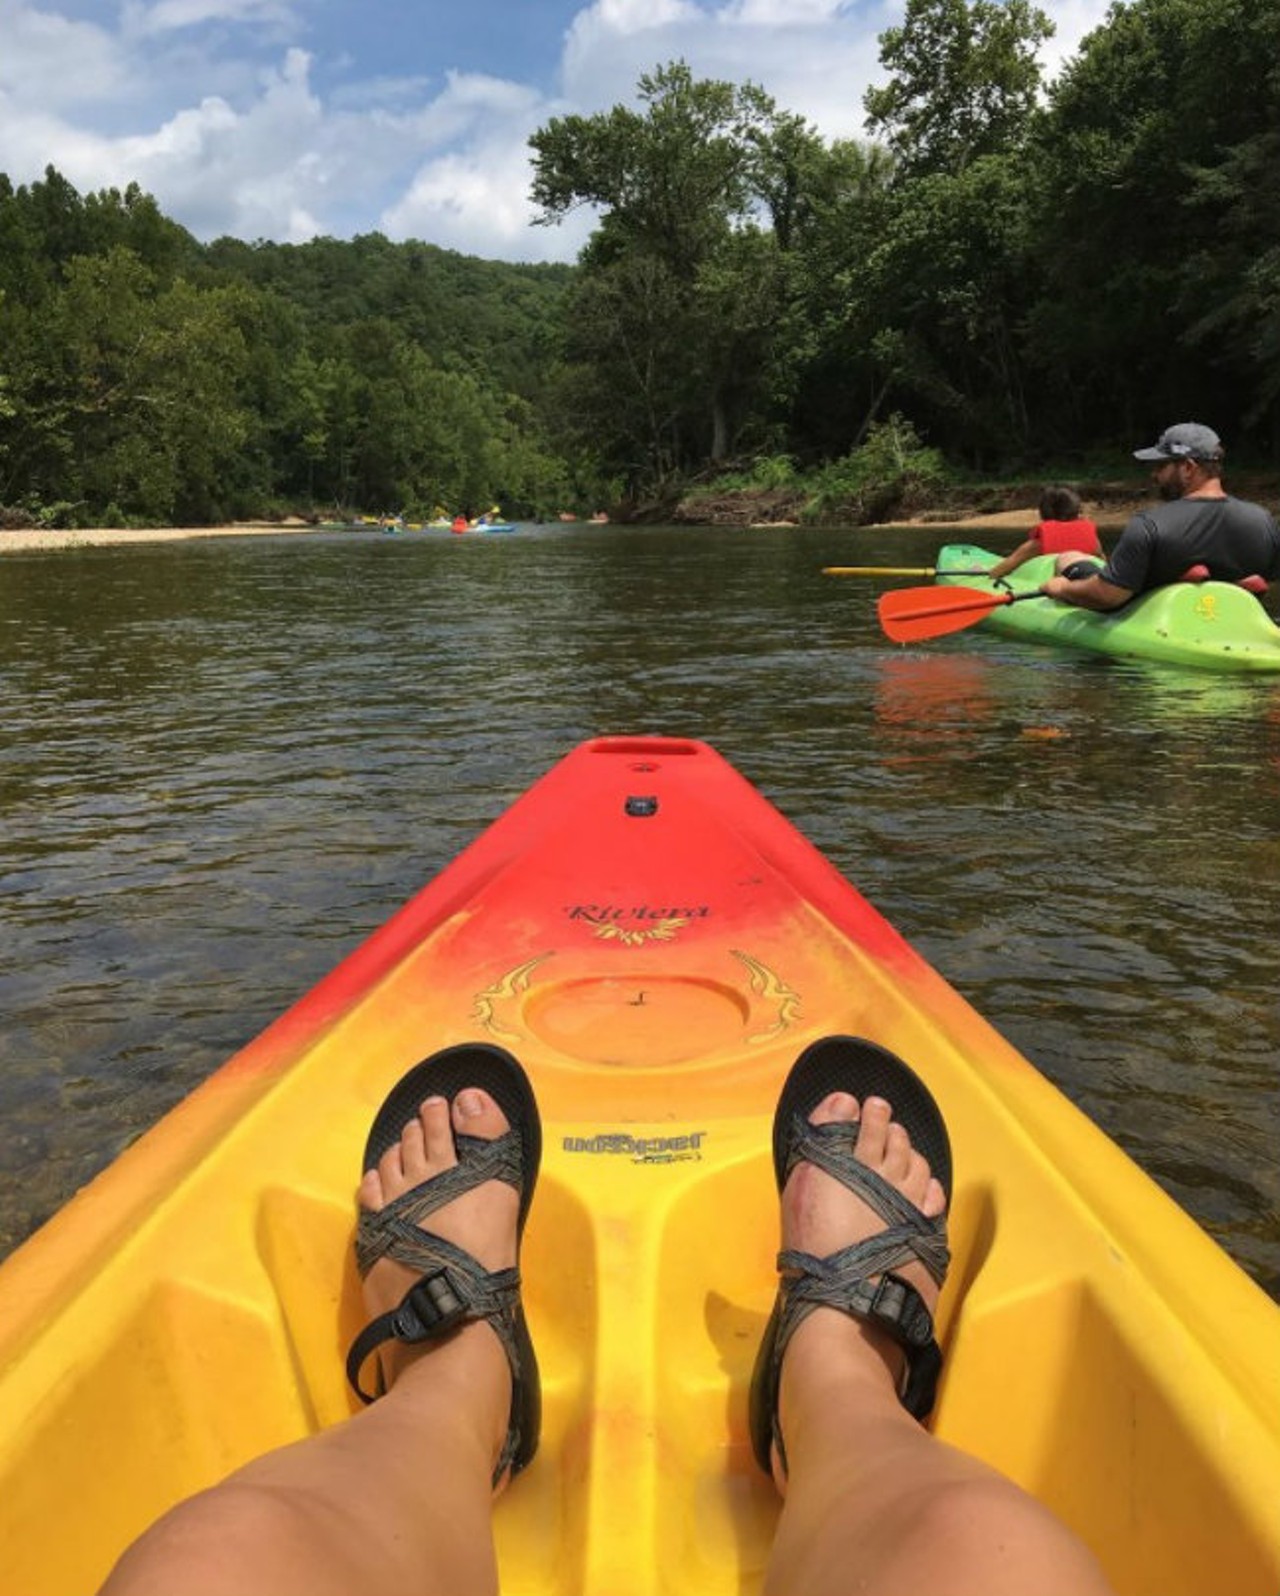 The Jacks Fork River will supply about 46 miles of water for your canoeing pleasure. Some previous canoeing experience is best: Harvey's Alley Spring Canoe Rental, one of your rental options at Jacks Fork, recommends that you have ?a more advanced degree of canoeing skill to venture along this narrow stream. Photo courtesy of Instagram / maddiegage96.